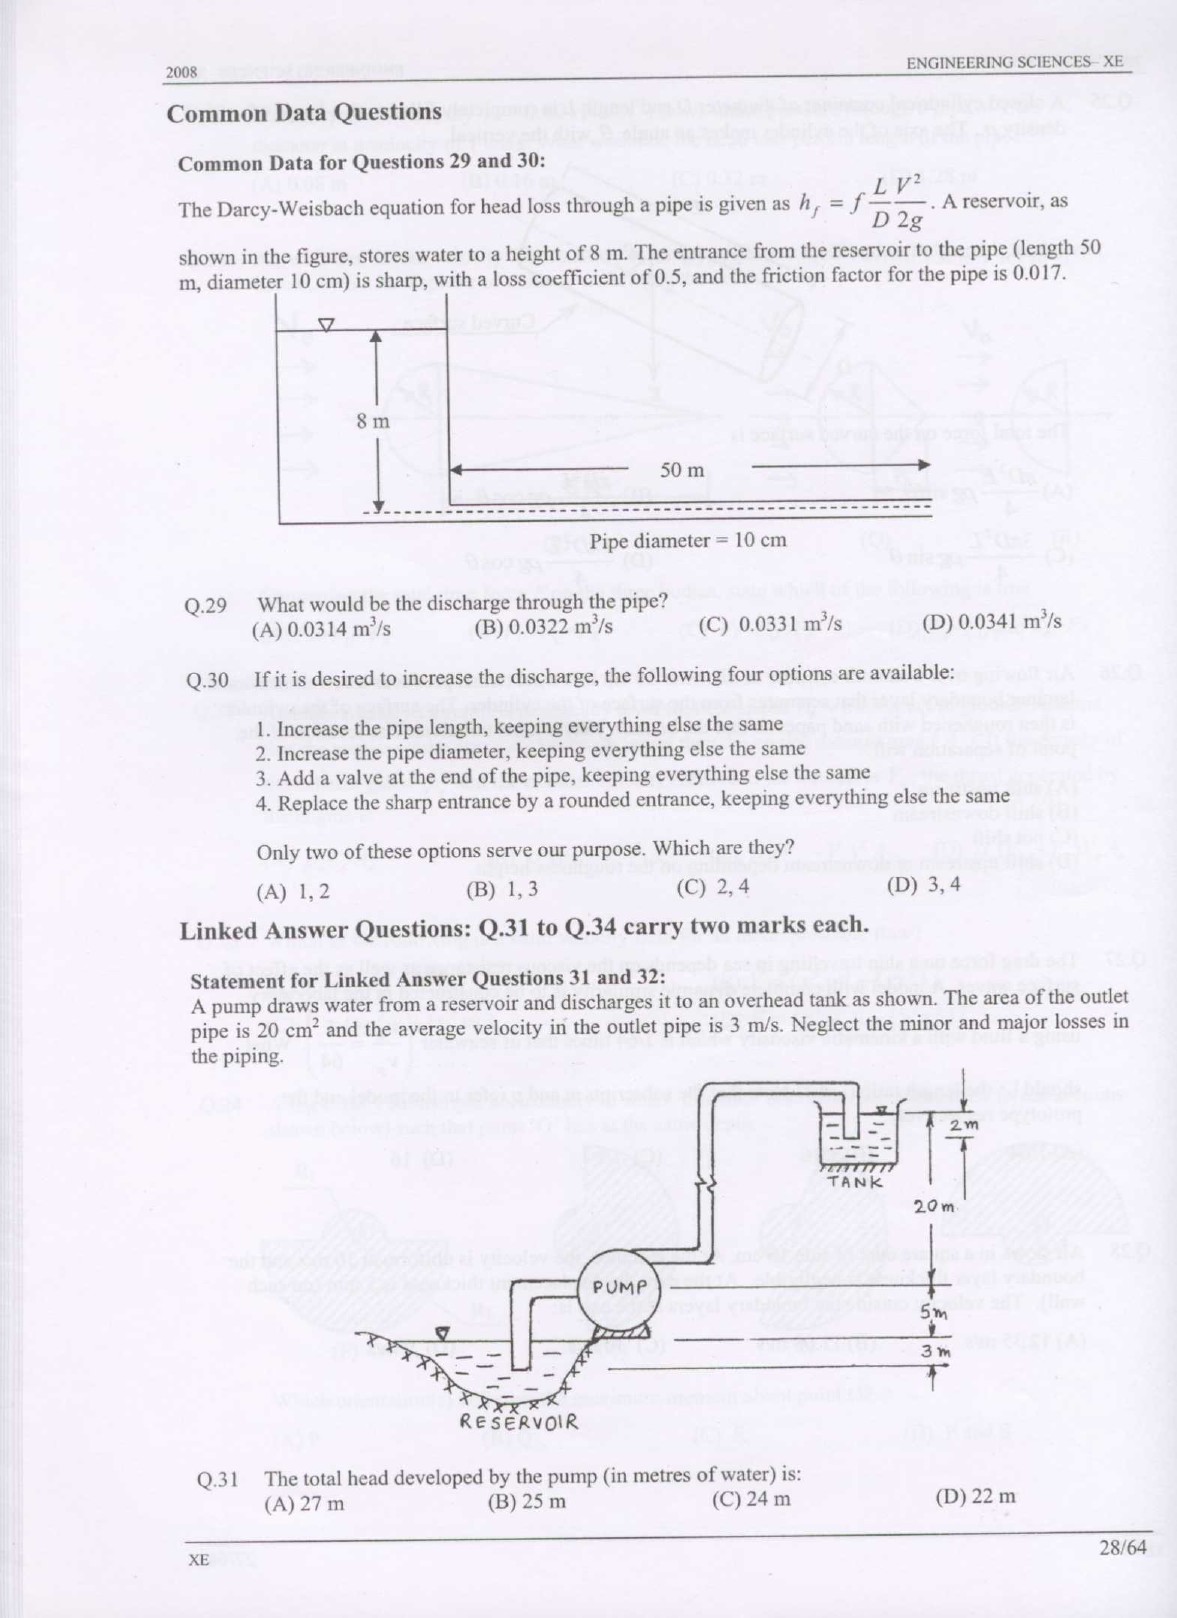 GATE Exam Question Paper 2008 Engineering Sciences 28